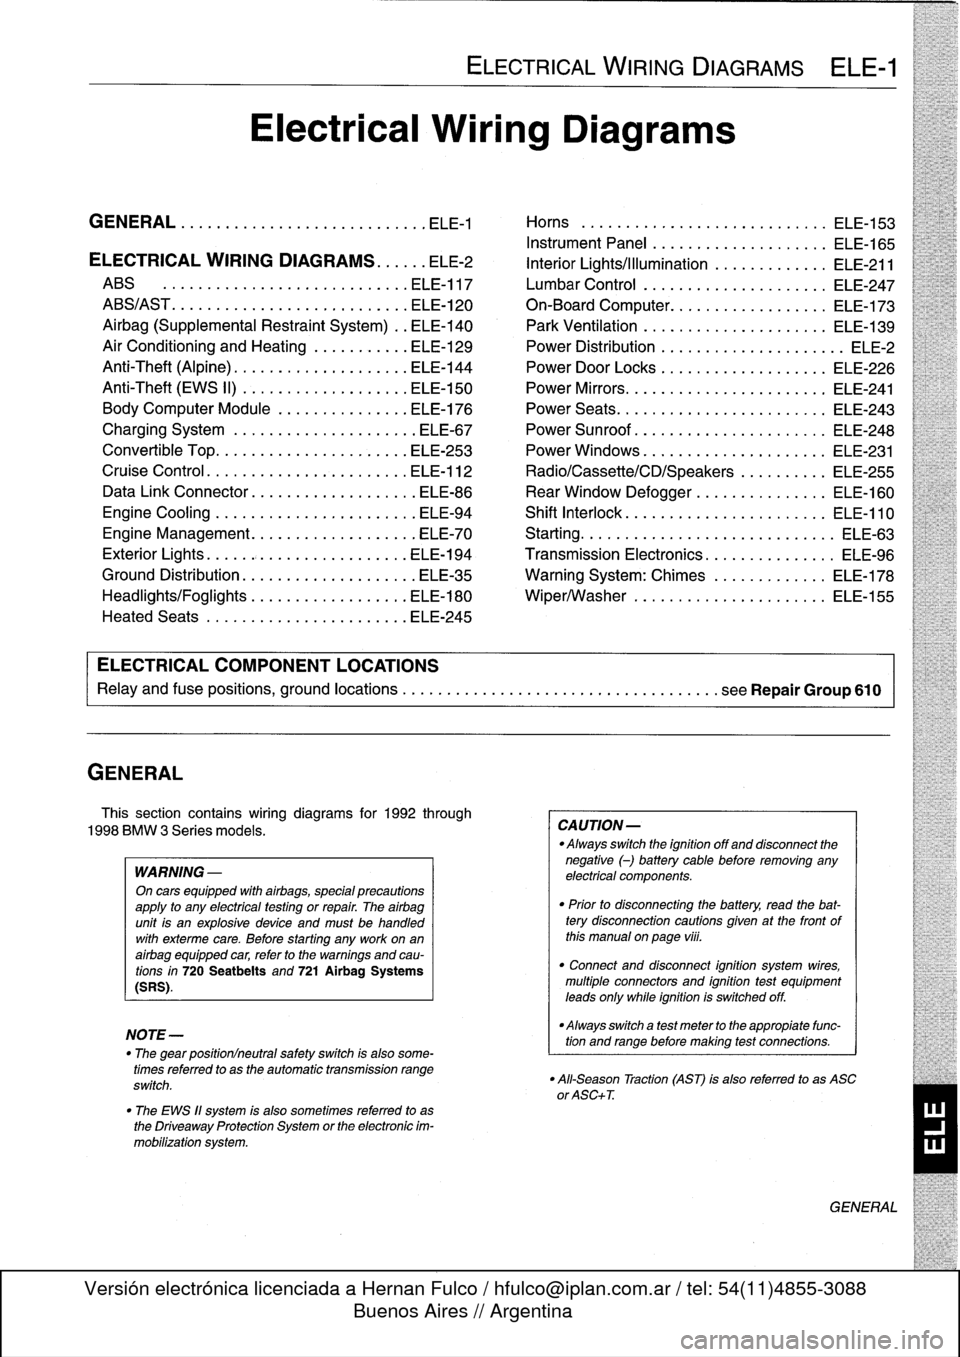 BMW 325i 1994 E36 Workshop Manual 
GENERAL

This
section
contains
wiring
diagrams
for
1992
through

1998
BMW
3
Series
models
.

WARNING
-

On
cars
equipped
with
airbags,
special
precautions
apply
to
any
electrical
testing
or
repair
.
